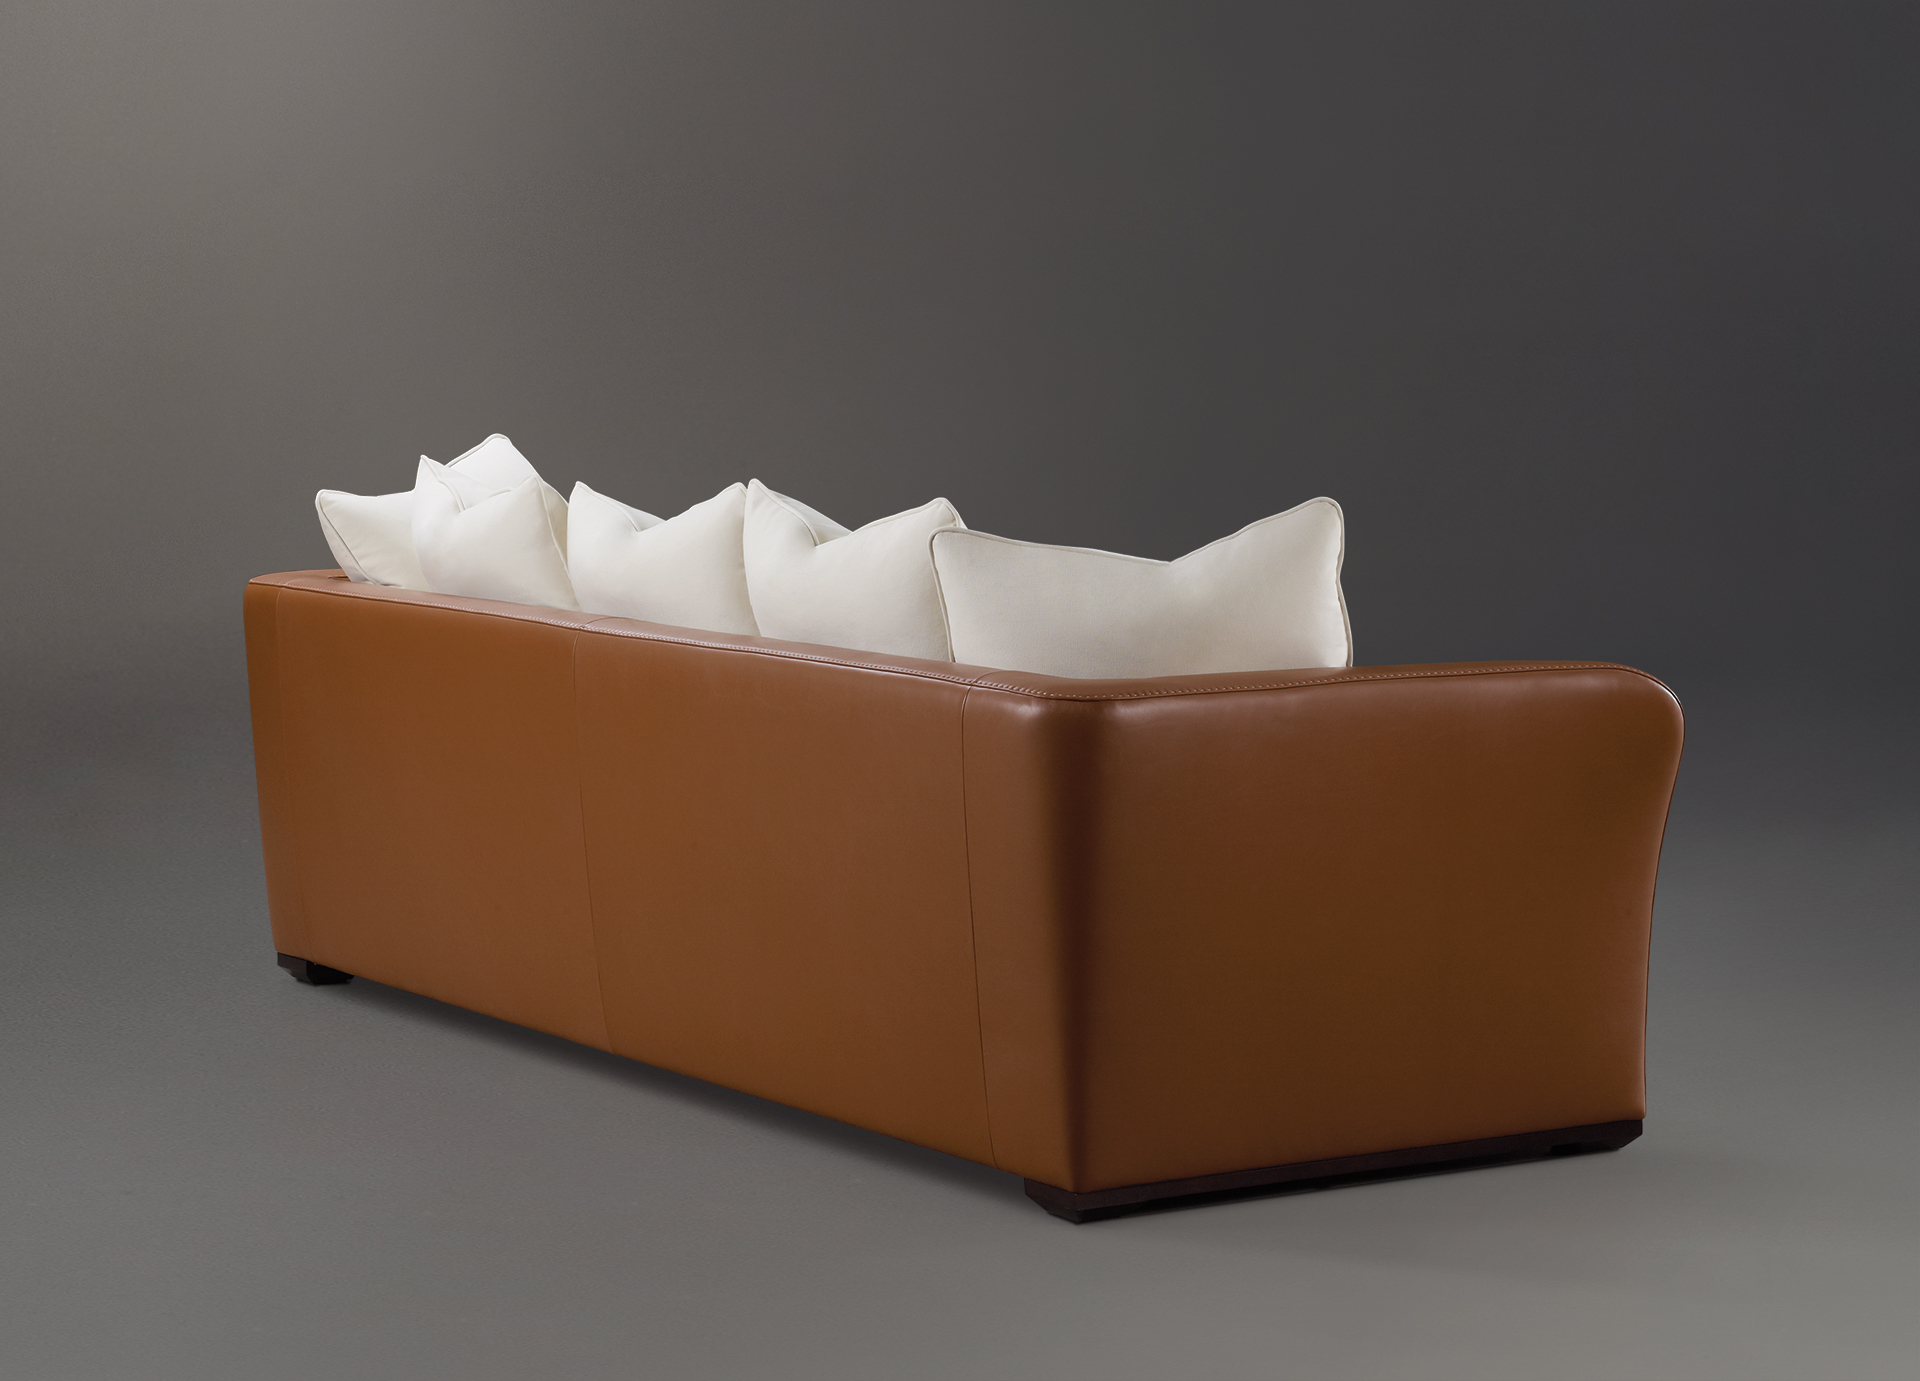 Shangri-la is a wooden sofa covered in leather and fabric, from Promemoria's catalogue | Promemoria